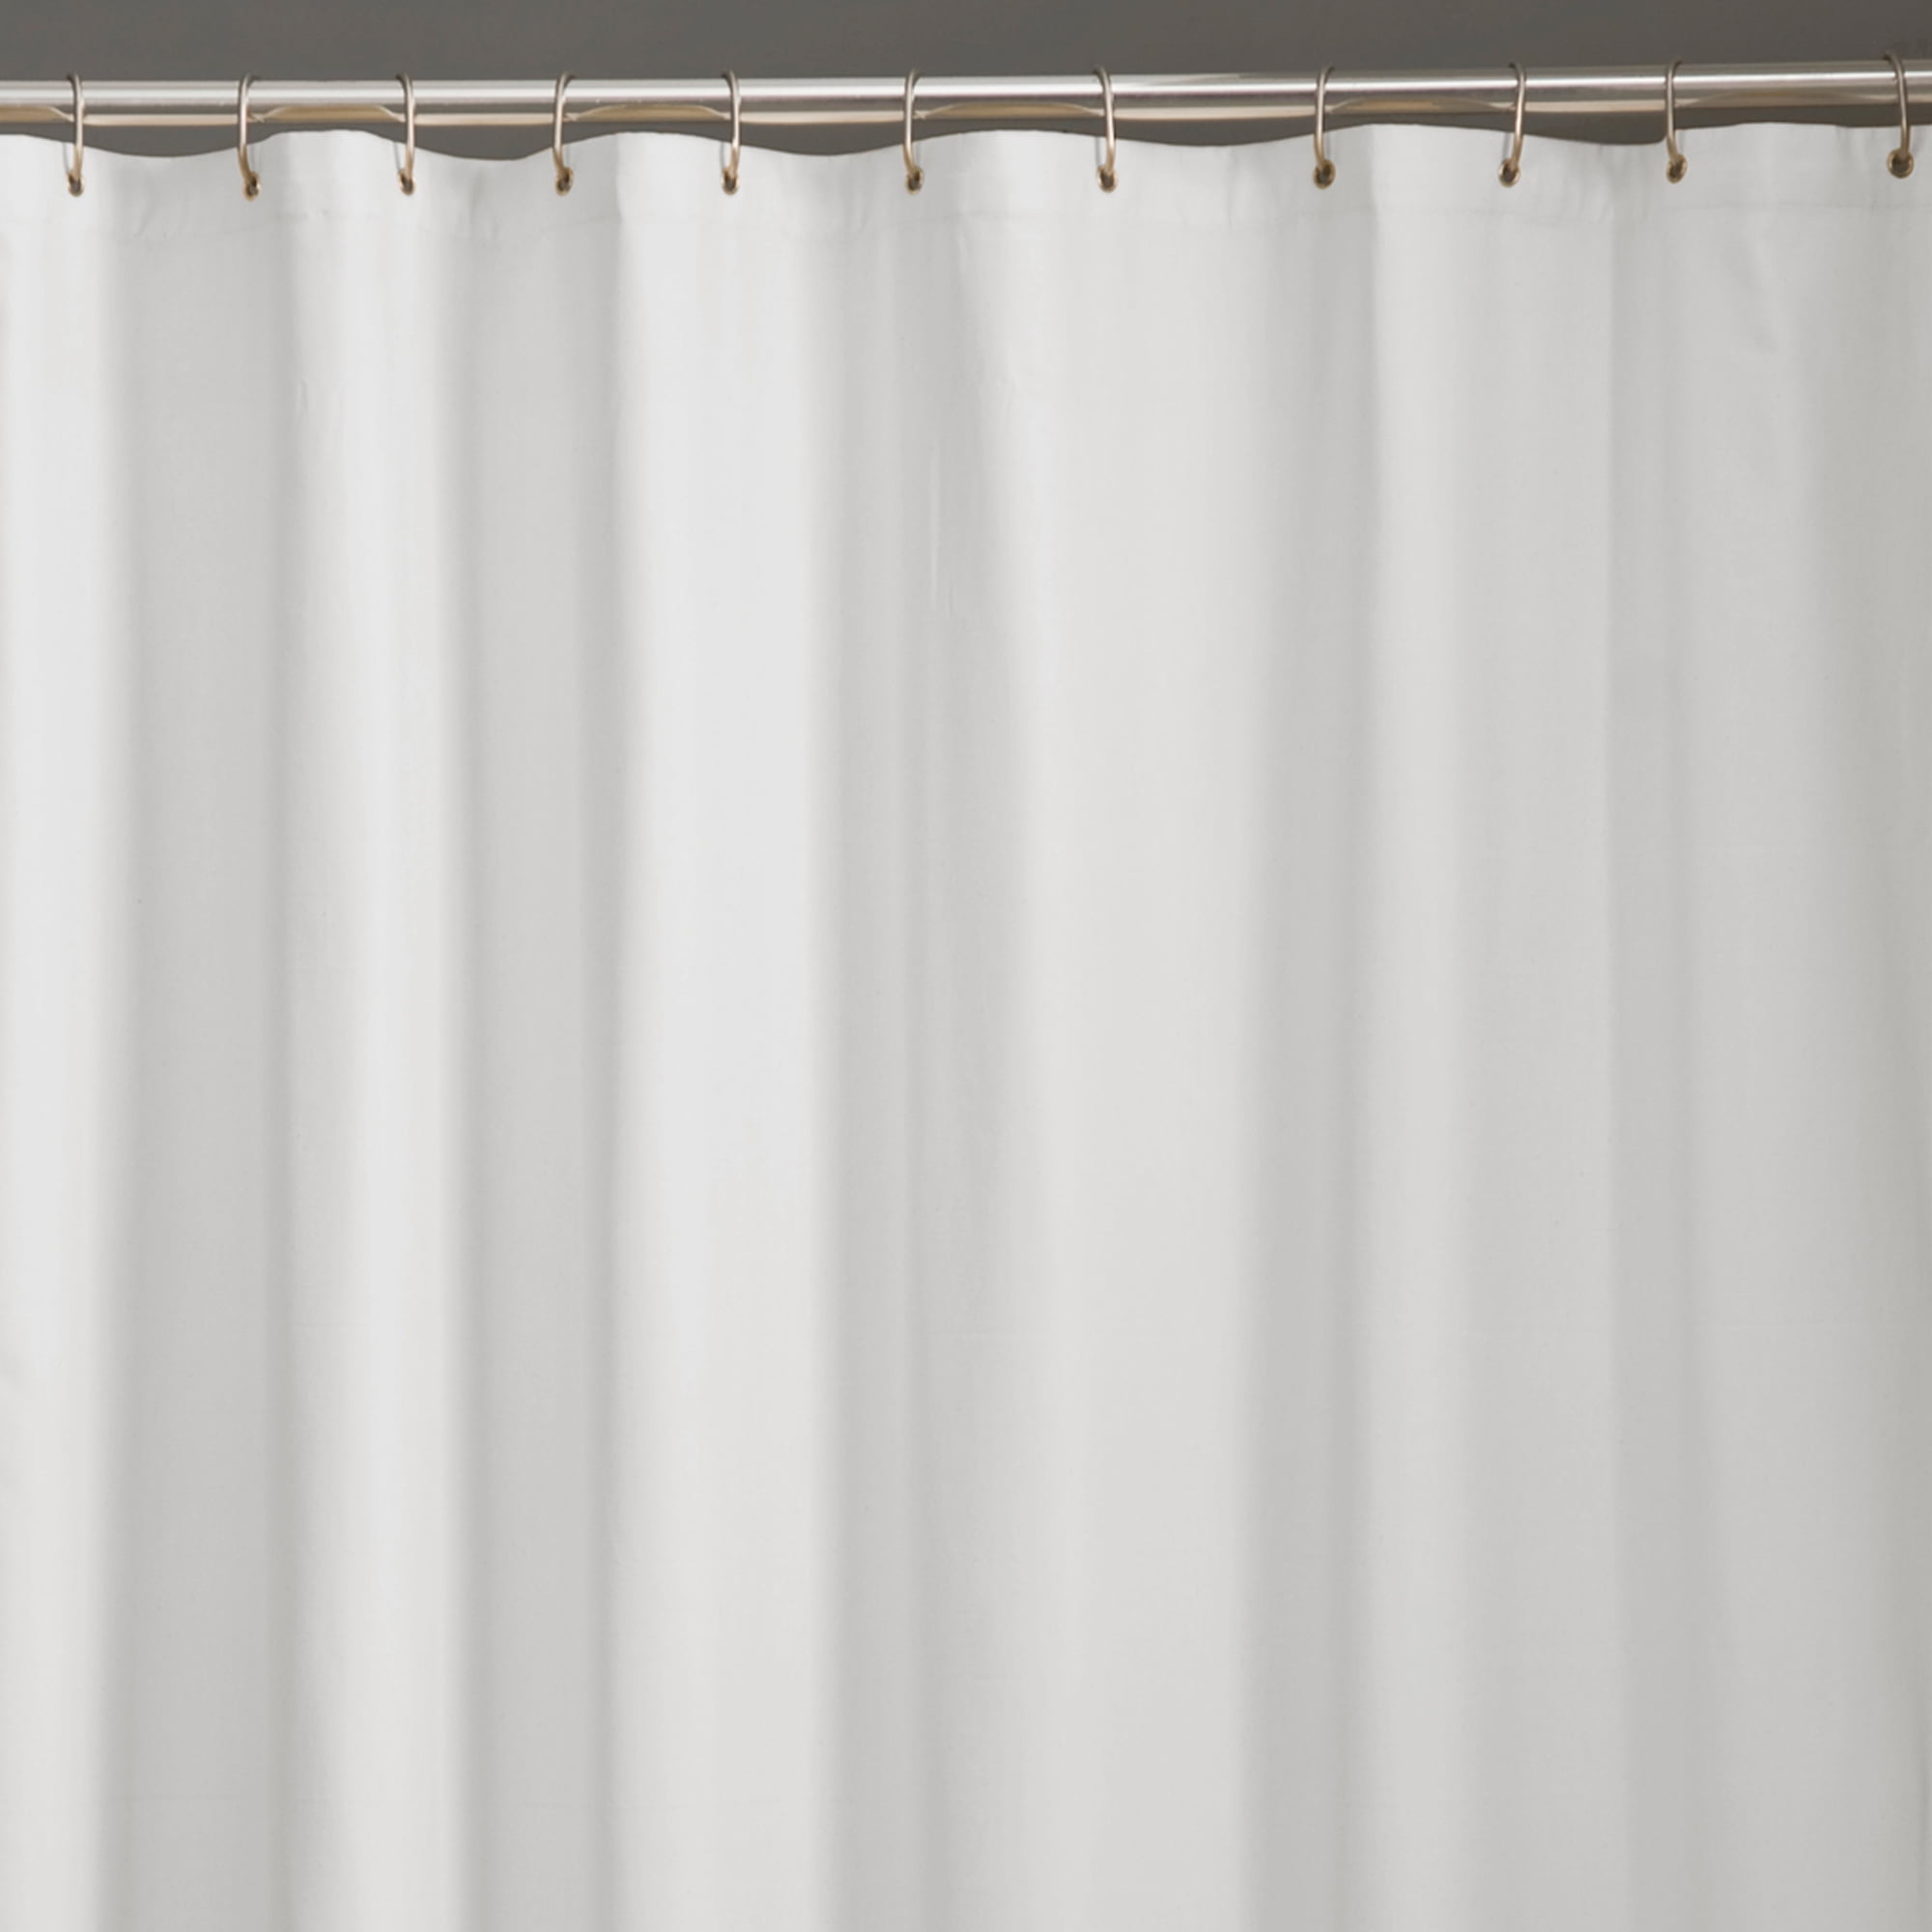 X 72in White Fabric Shower Curtain or Liner H20WW Zenith Products 70in 